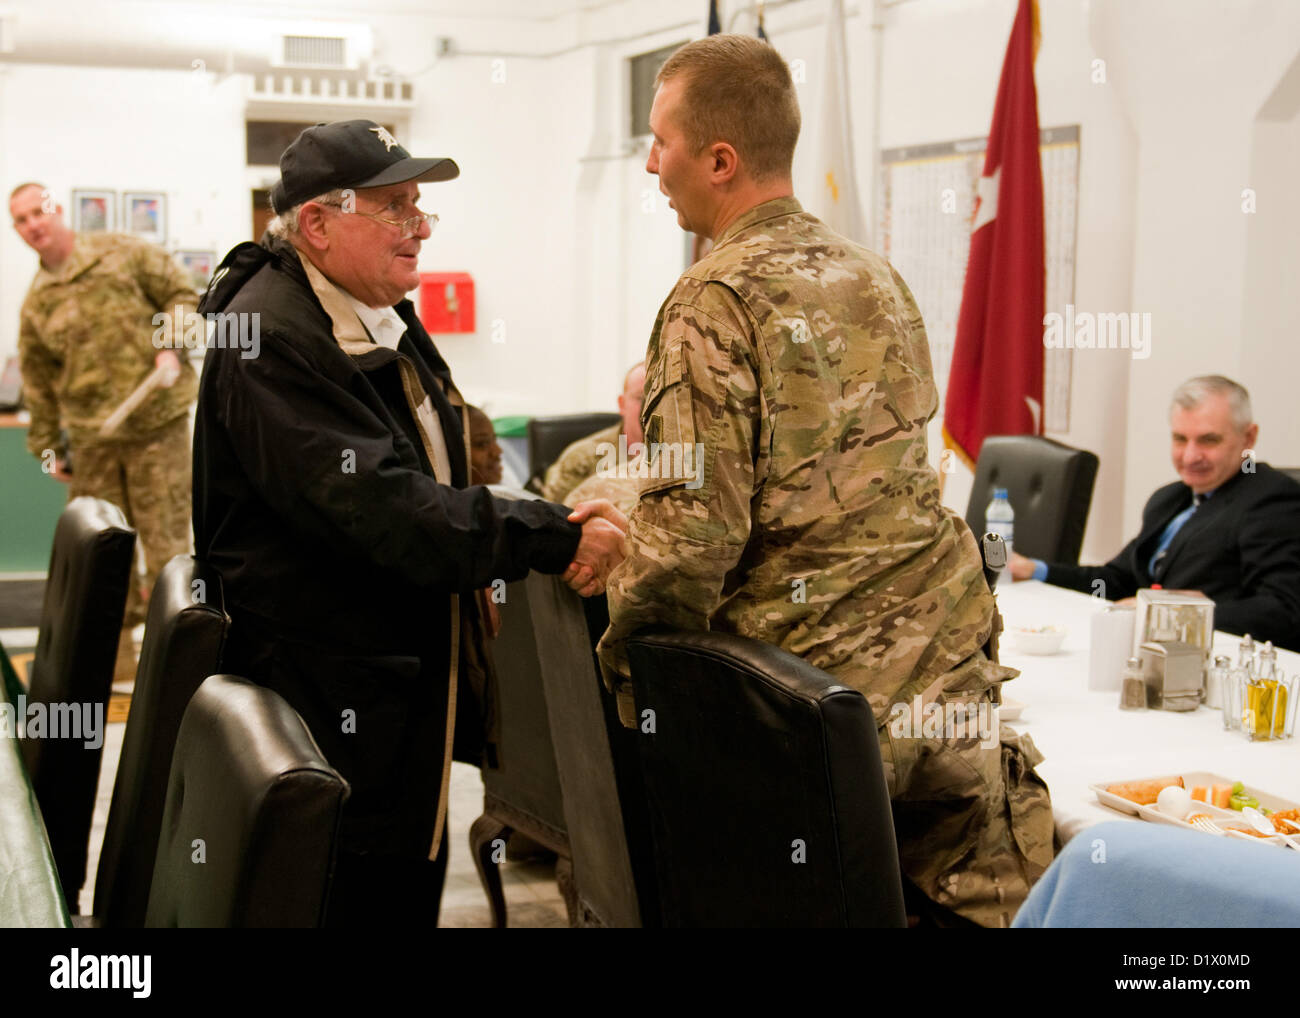 BAGRAM AIRFIELD, Afghanistan – U.S. Senator Carl Levin, a senator for the state of Michigan, shakes hands with a U.S. Soldier attached to Combined Joint Task-1, 1st Infantry Division, during a constituent breakfast at Bagram Airfield, Afghanistan, Jan. 7, 2013. Levin and U.S. Senator Jack Reed, senior state senator for Rhode Island, visited troops from their respective states to boost morale and discuss U.S. efforts in Afghanistan. (U.S. Army photo by Sgt. Christopher Bonebrake, 115th Mobile Public Affairs Detachment) Stock Photo